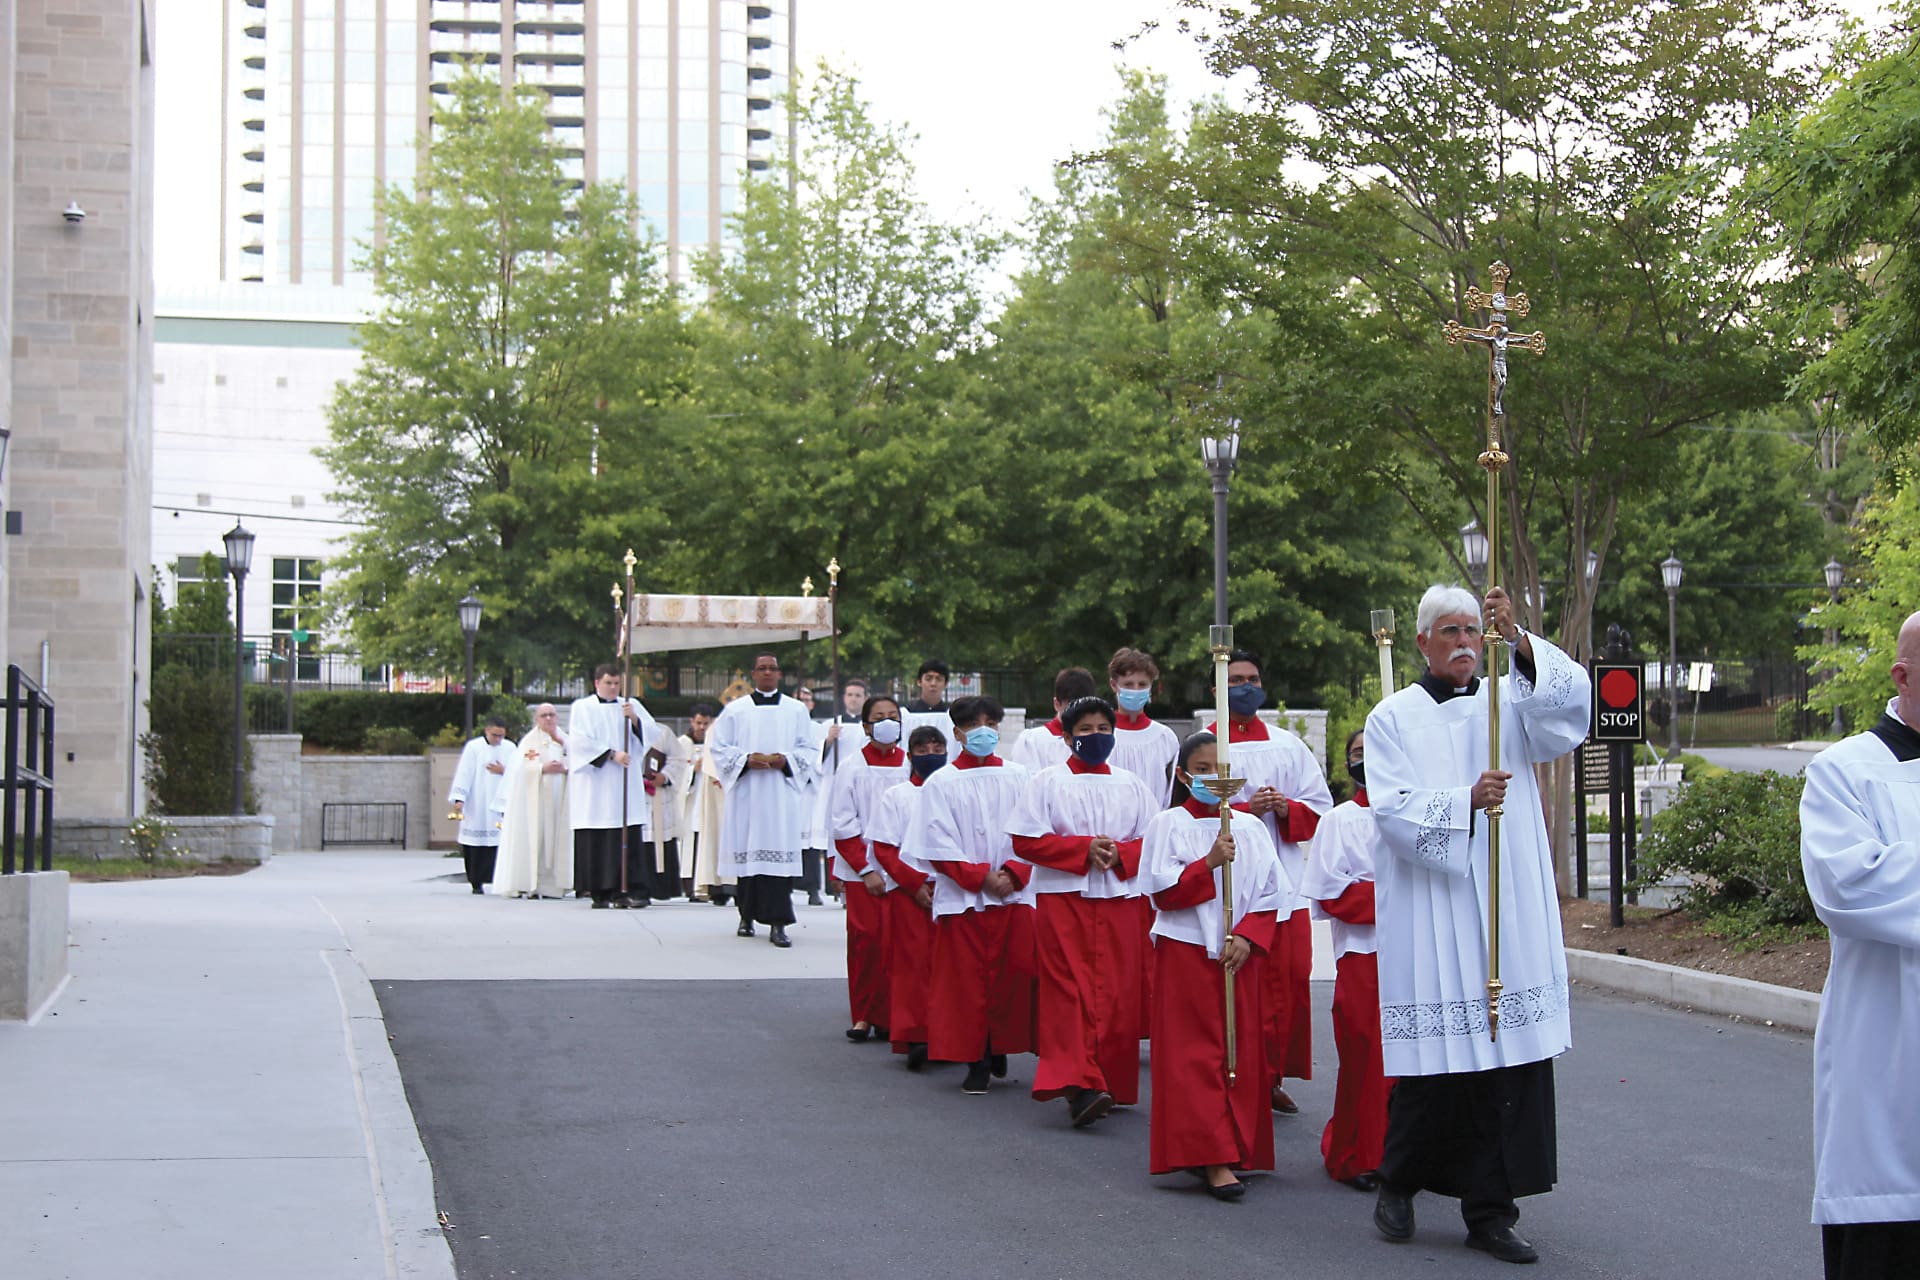 The eucharistic procession at the Cathedral of Christ the King in Atlanta marked the evening Vigil of Corpus Christi. Archbishop Gregory Hartmayer led the June 2 procession. Photo by David Pace